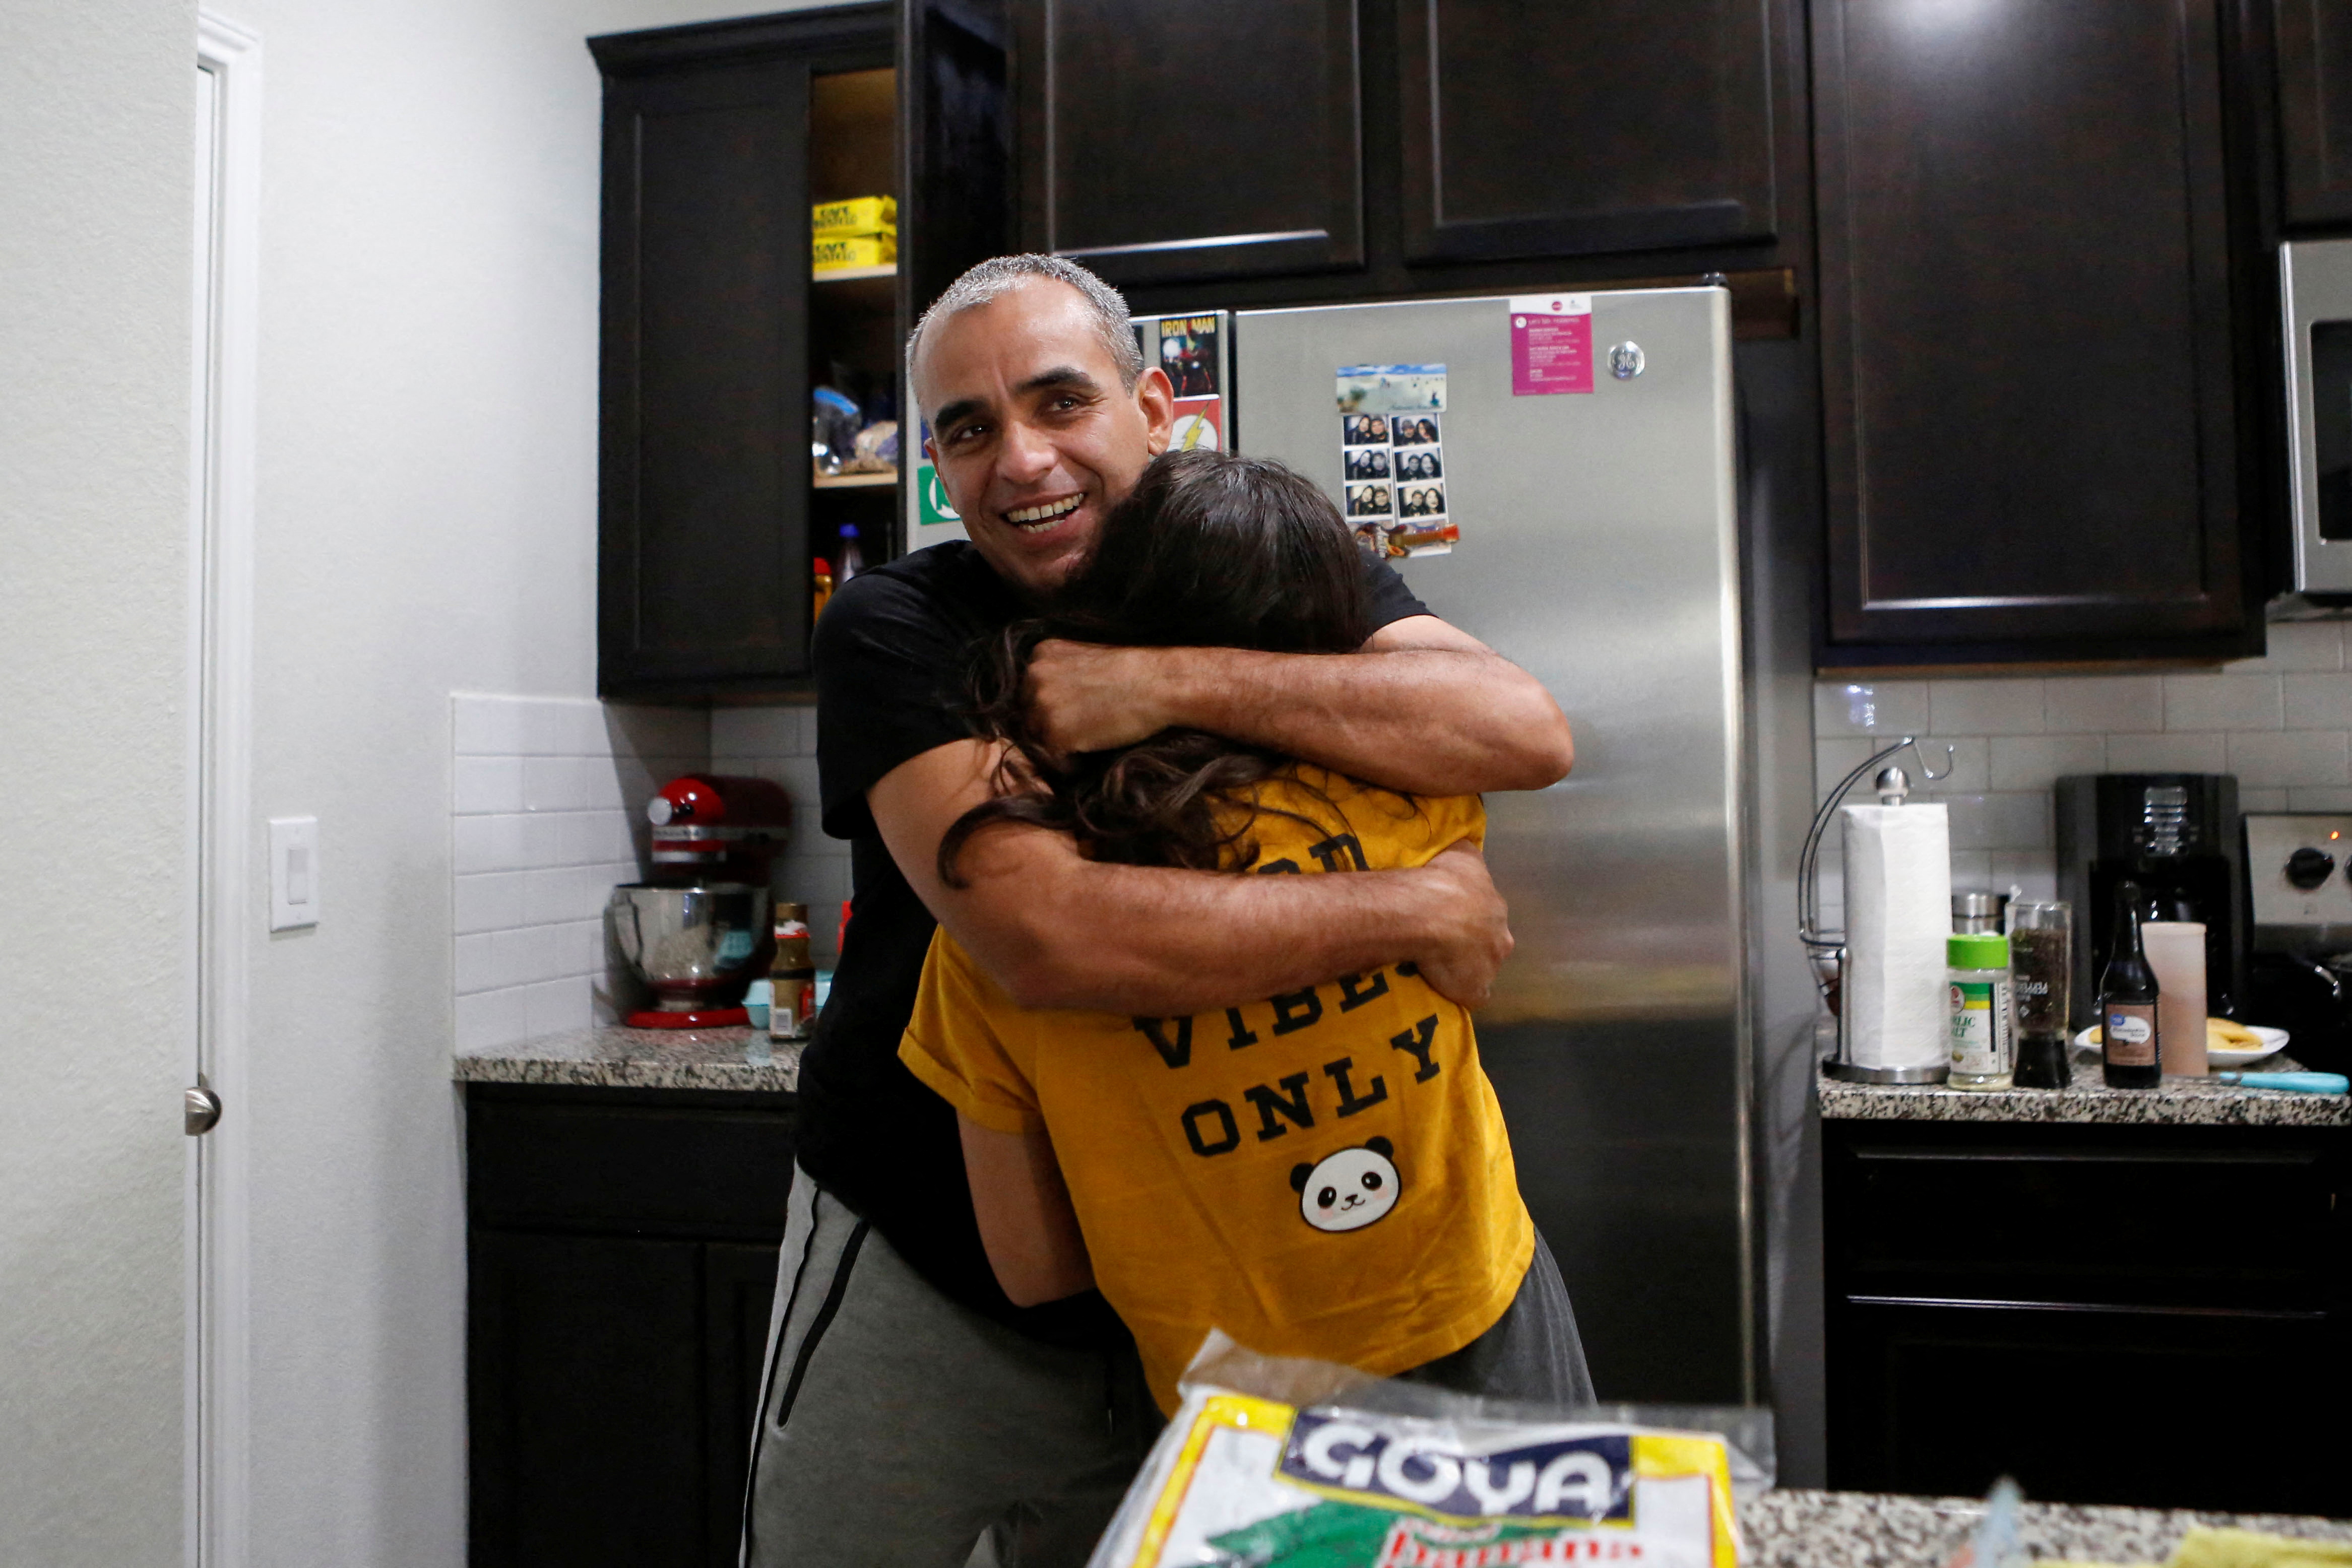 Anibal Pirela embraces his 12-year-old daughter Paula in the apartment he lives in with his family after migrating from Maracaibo, Venezuela and enrolling in a Department of Homeland Security program that allows migrants release with an ankle monitor, in Austin, Texas, U.S. December 22, 2021. REUTERS/Marco Bello